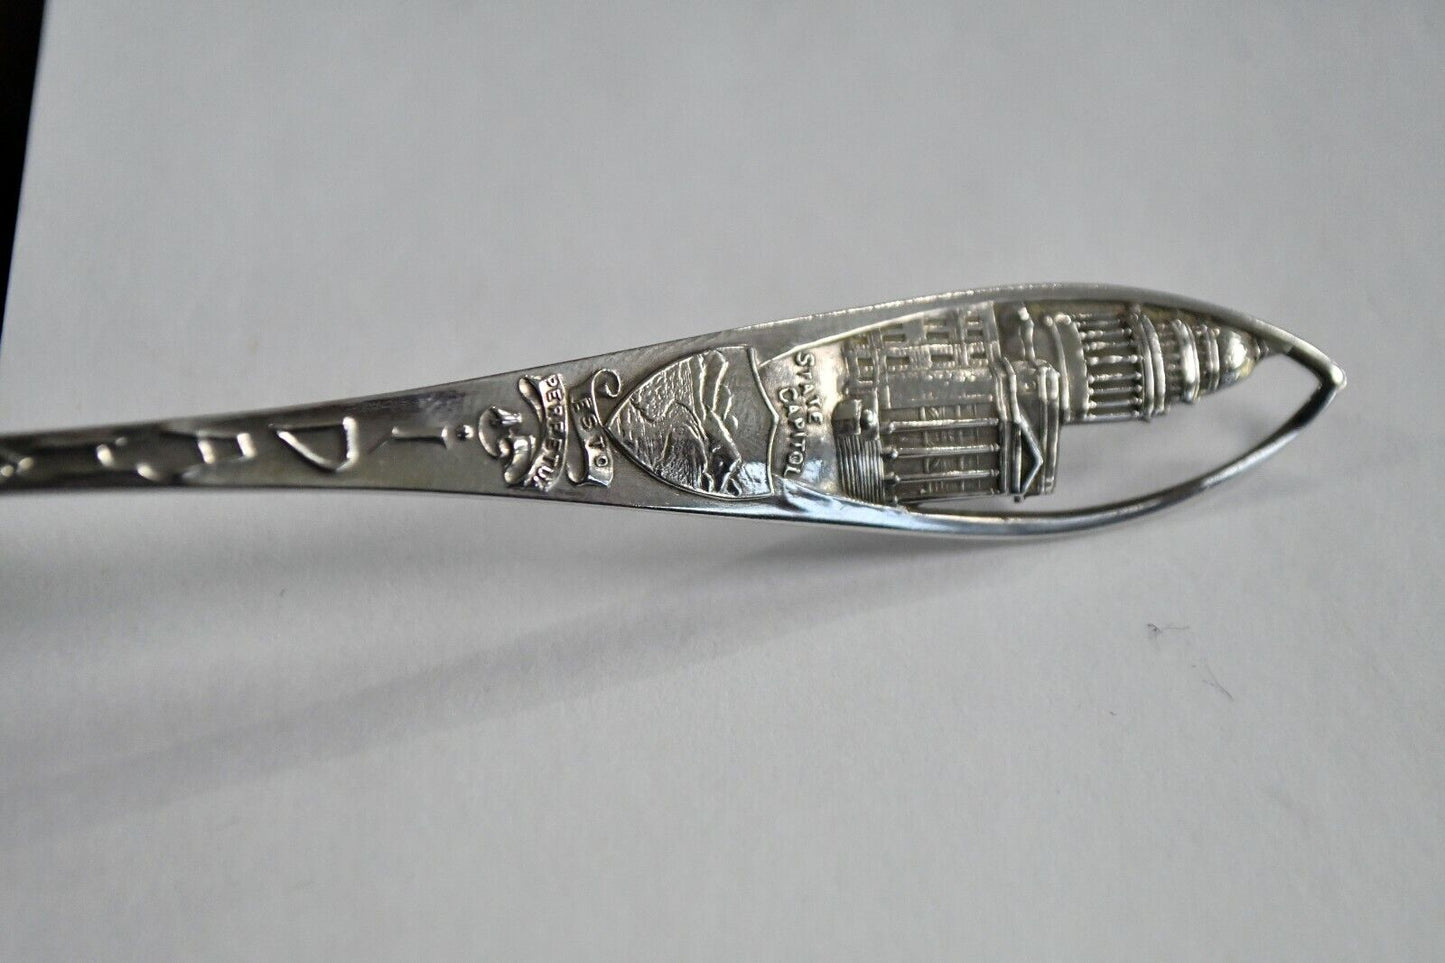 Idaho State Capitol Boise 5 5/8" Sterling Silver Spoon .49 oz.